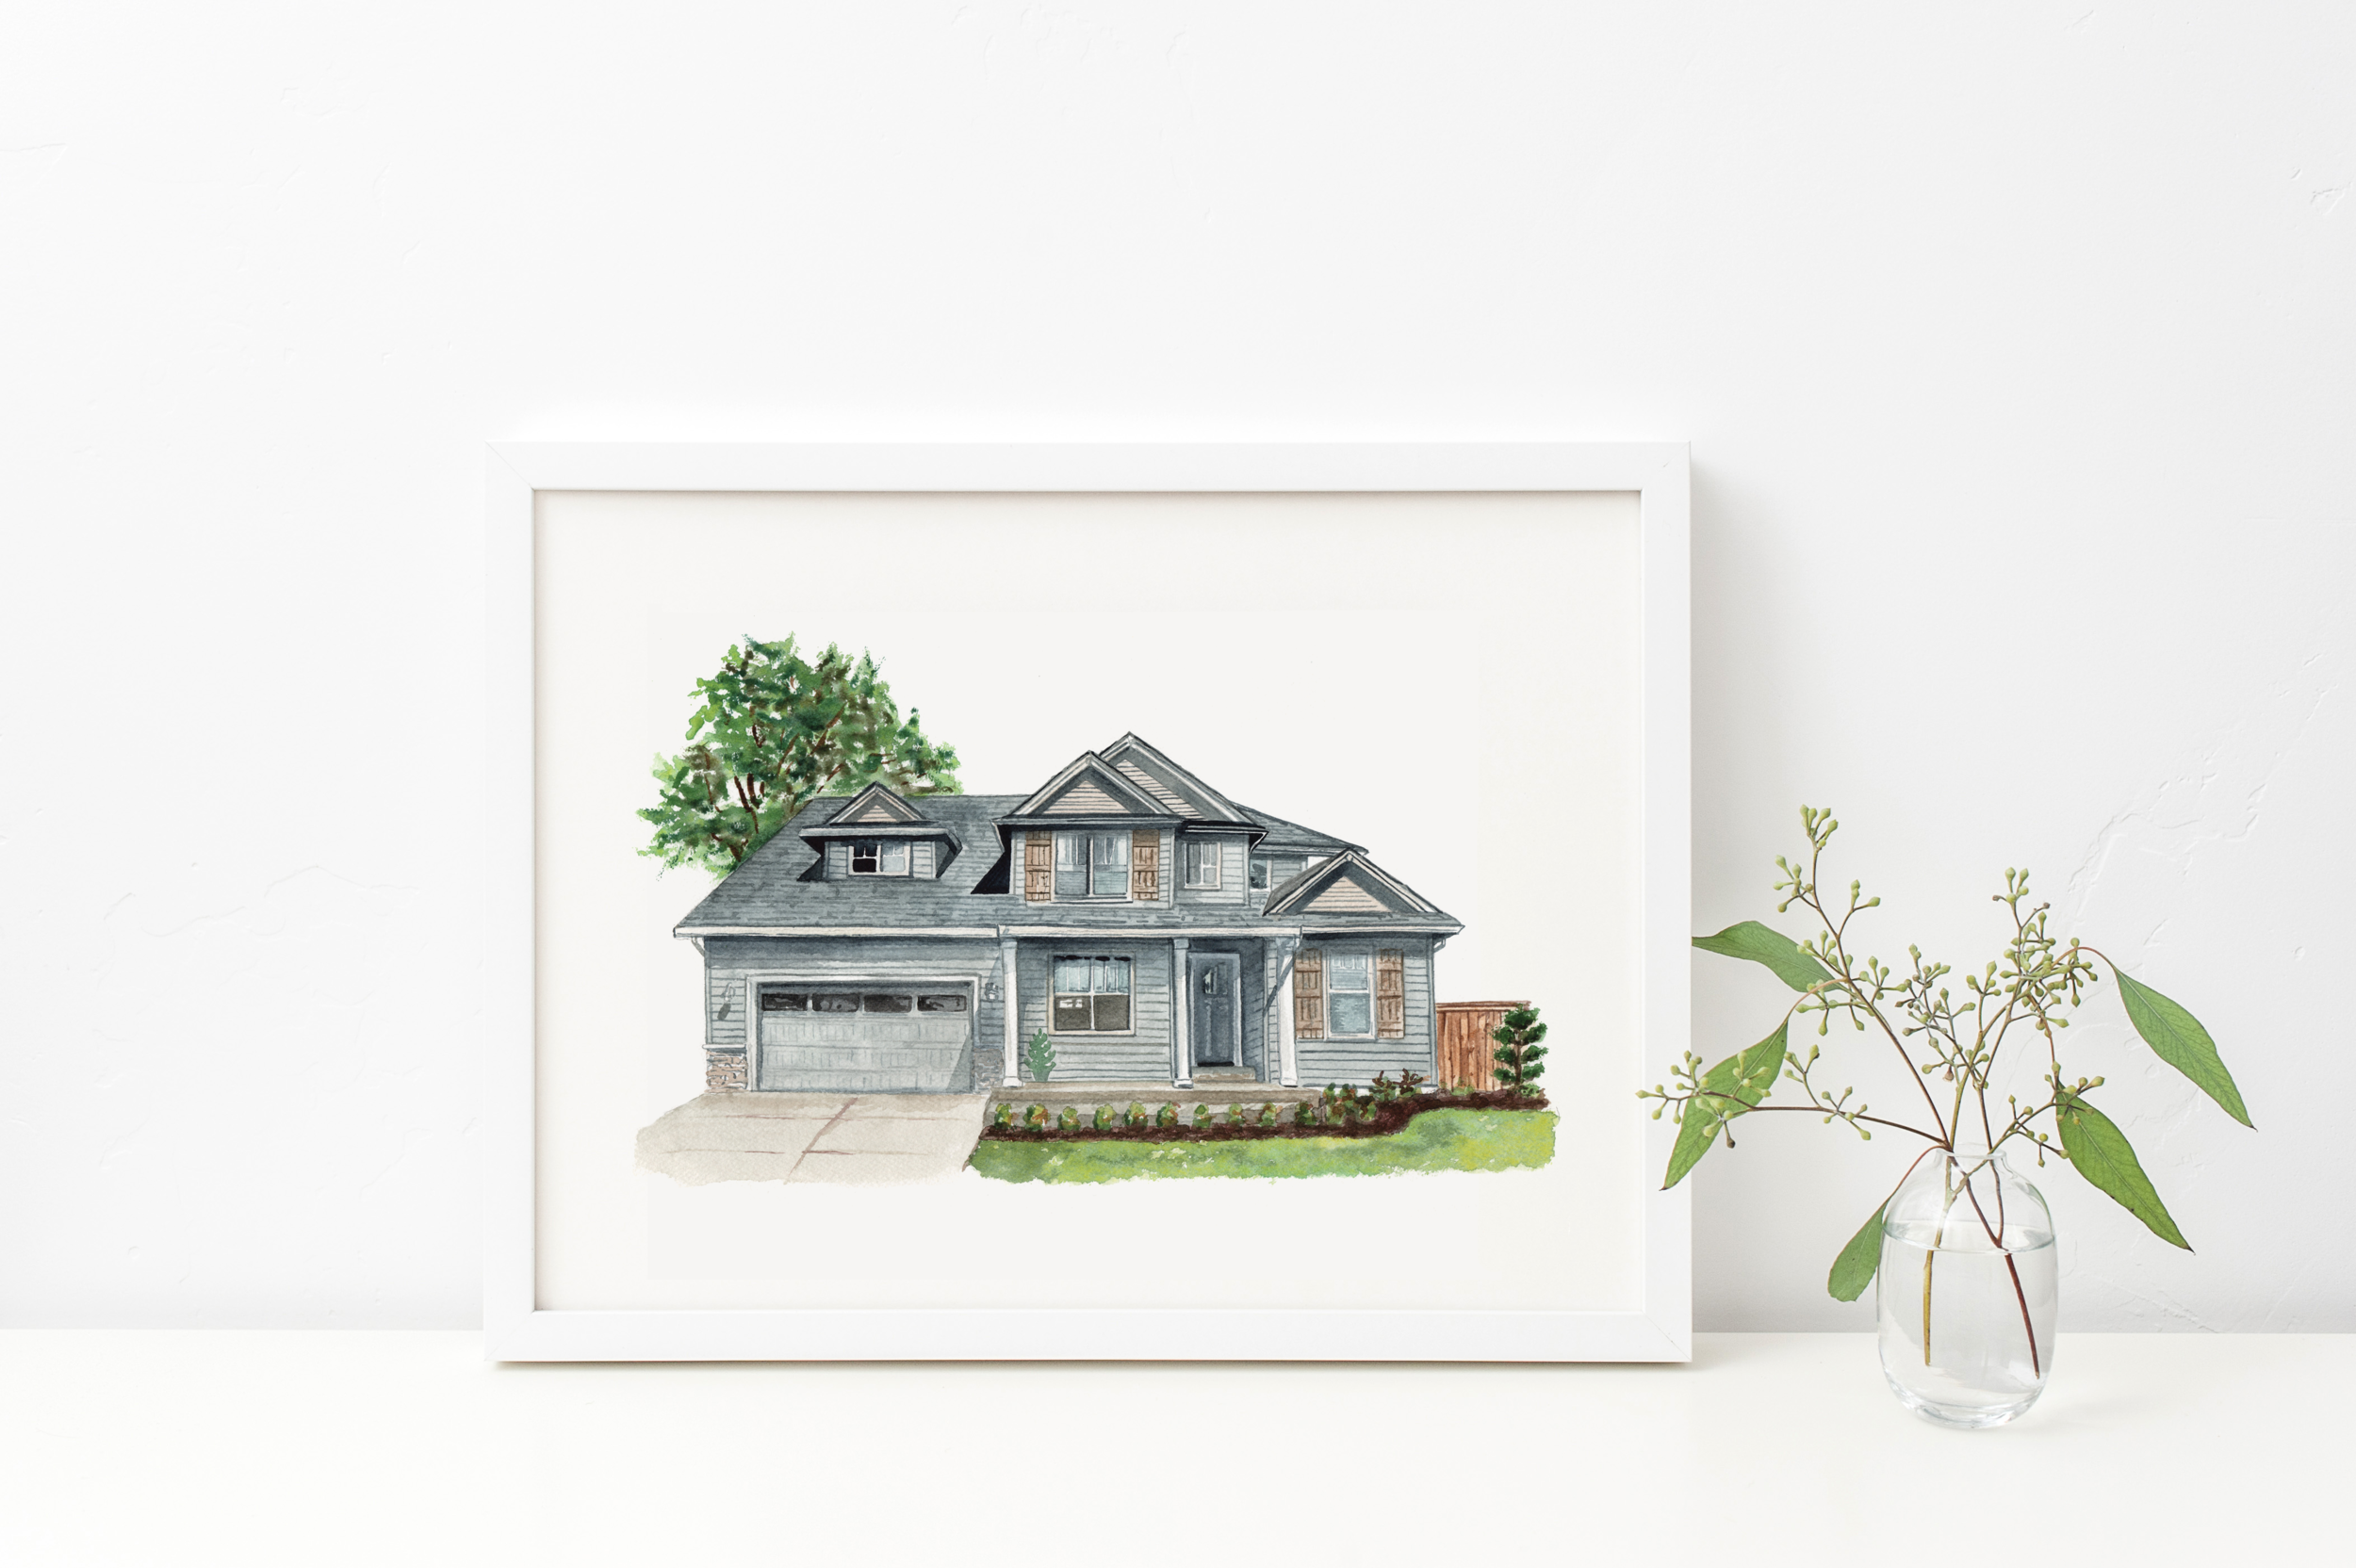 watercolor home house and building city element collection set town  16765359 PNG